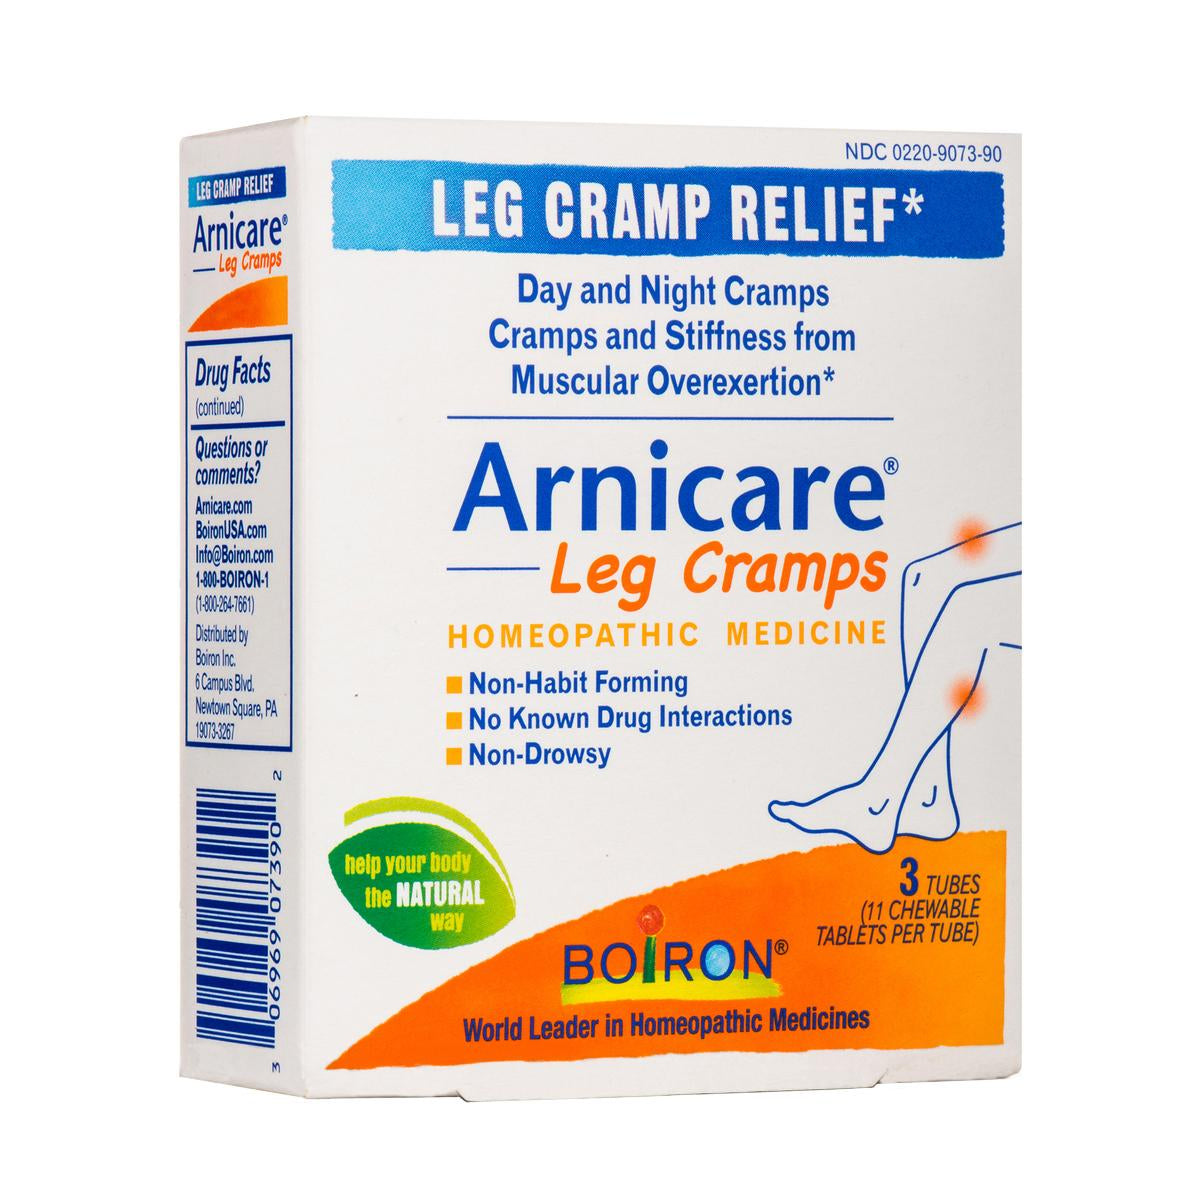 Primary image of Arnicare Leg Cramps